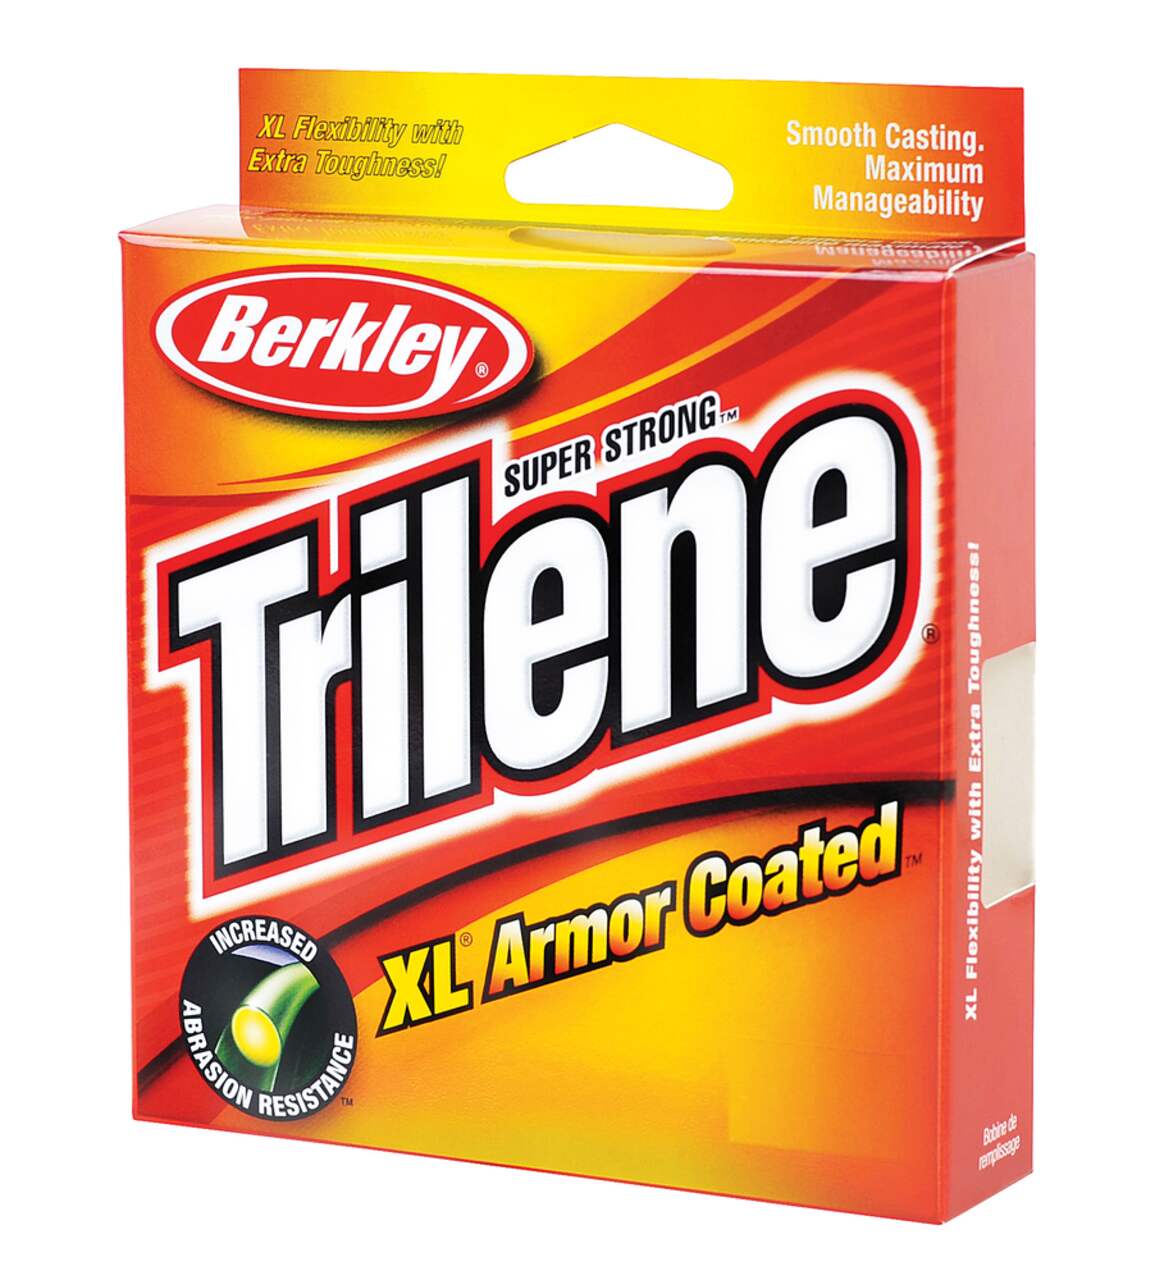  Berkley Trilene XL Smooth Casting Monofilament 300 Yd  Spool(2-Pound,Clear) : Monofilament Fishing Line : Sports & Outdoors